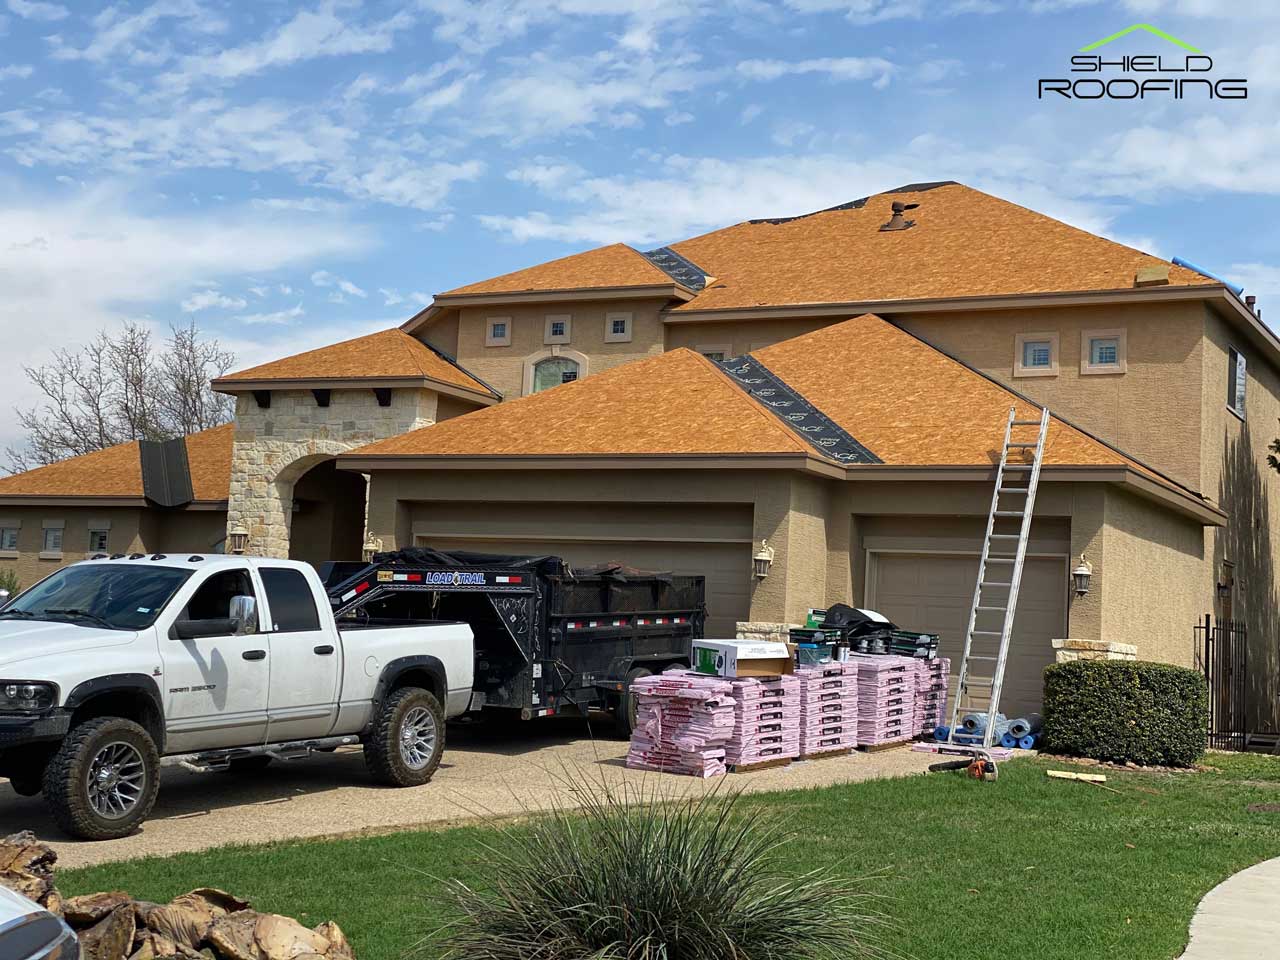 roofing permits residential in san antonio